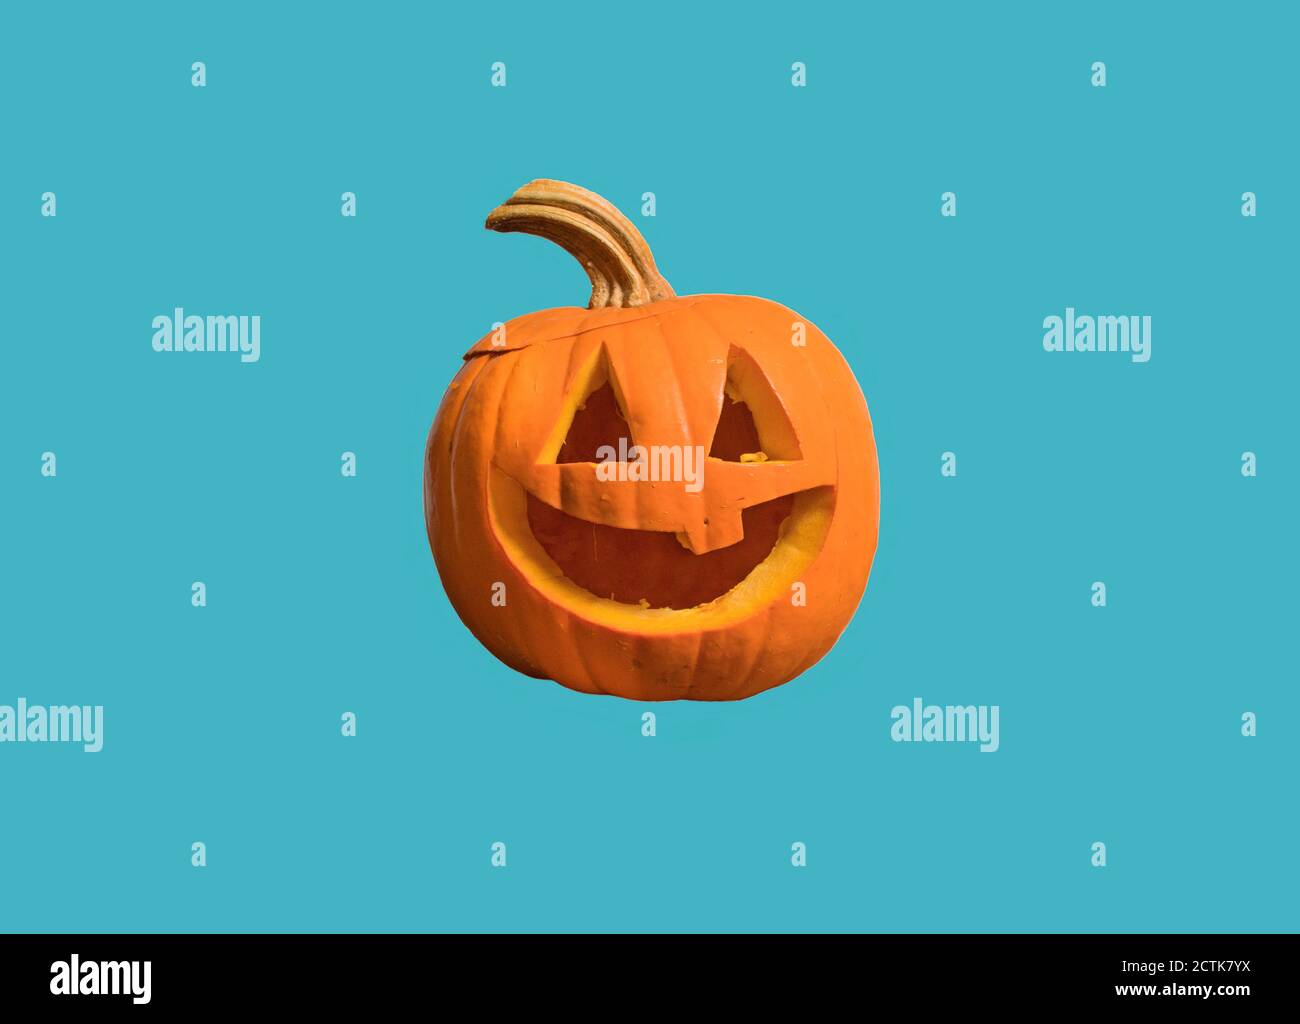 Halloween pumpkin with face, isolated on a blue background Stock Photo